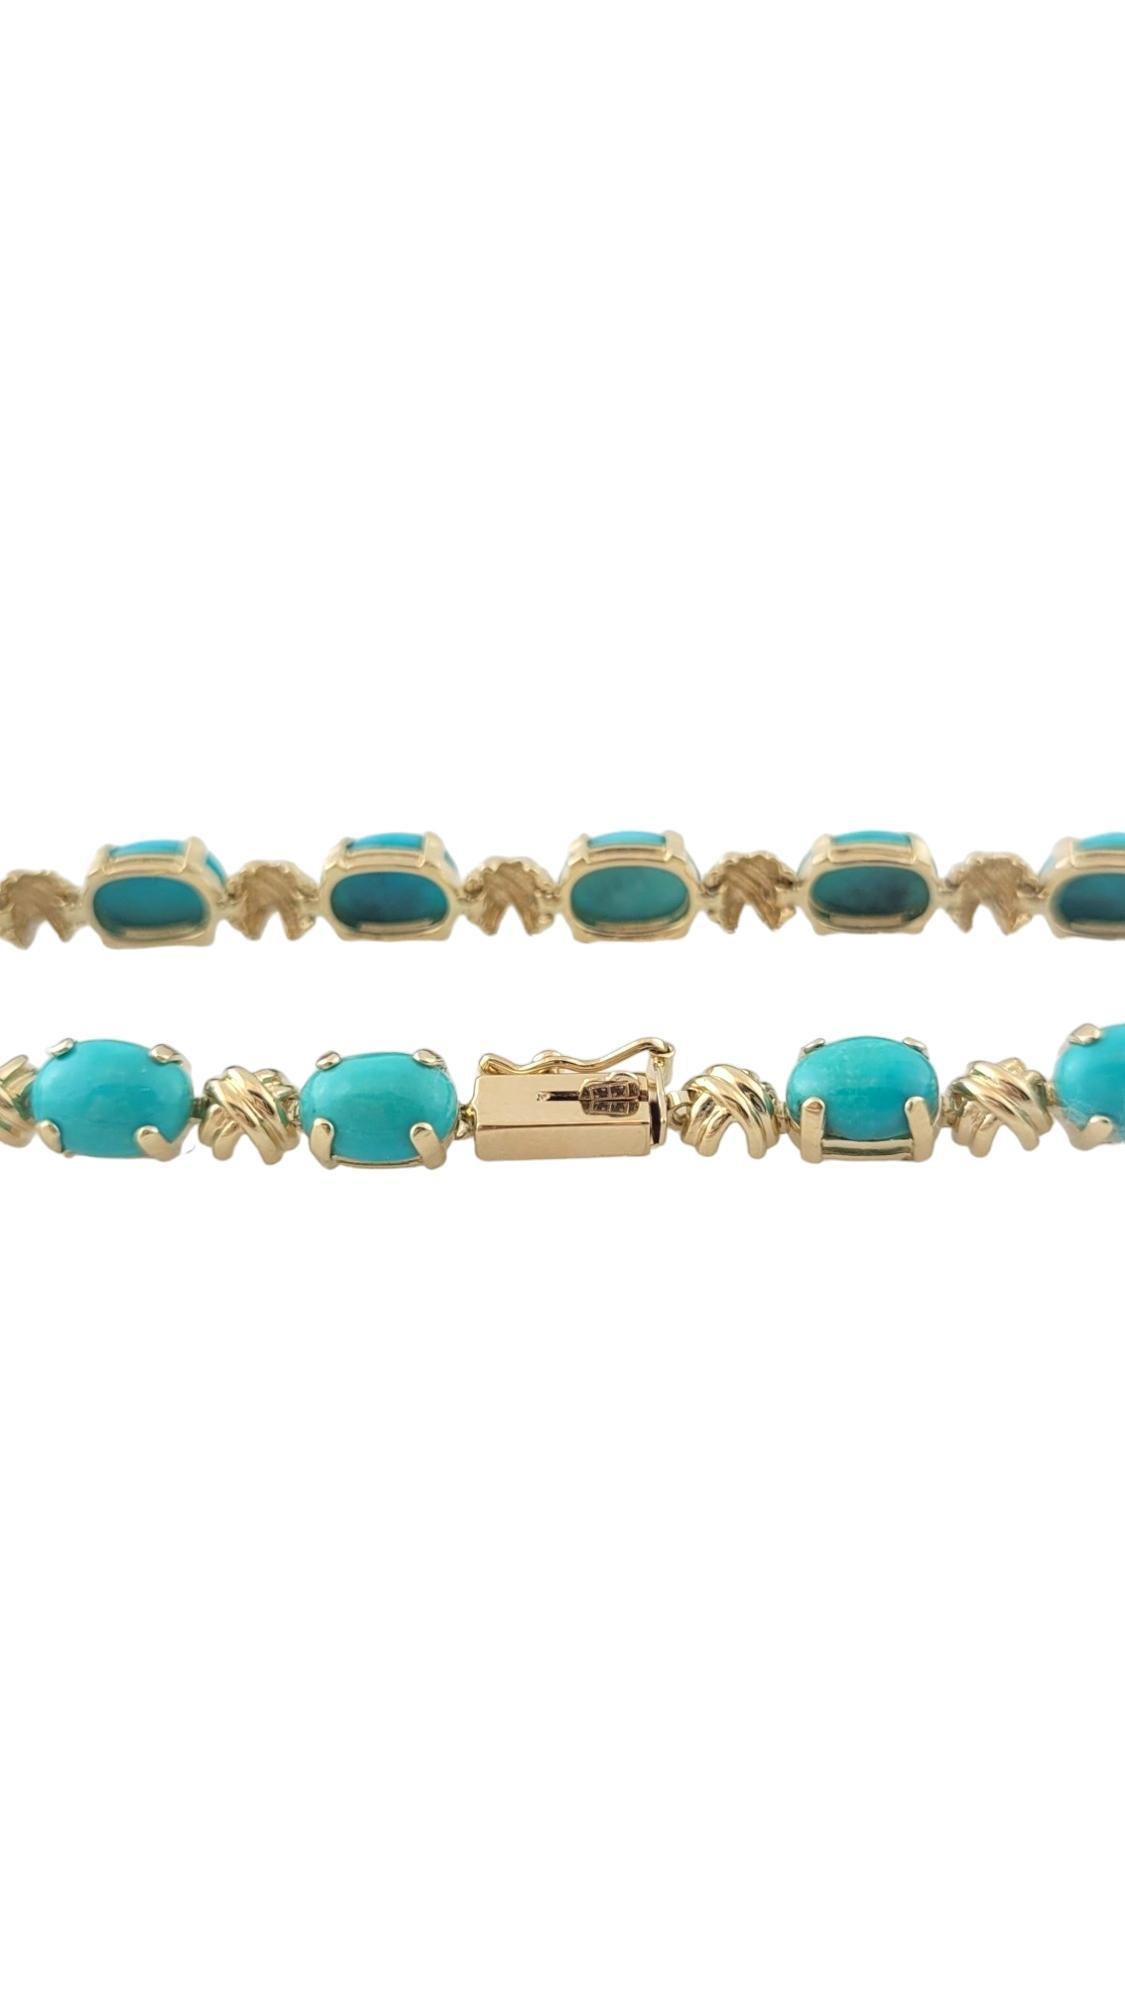 14K Yellow Gold Turquoise Bracelet #16369 In Good Condition For Sale In Washington Depot, CT